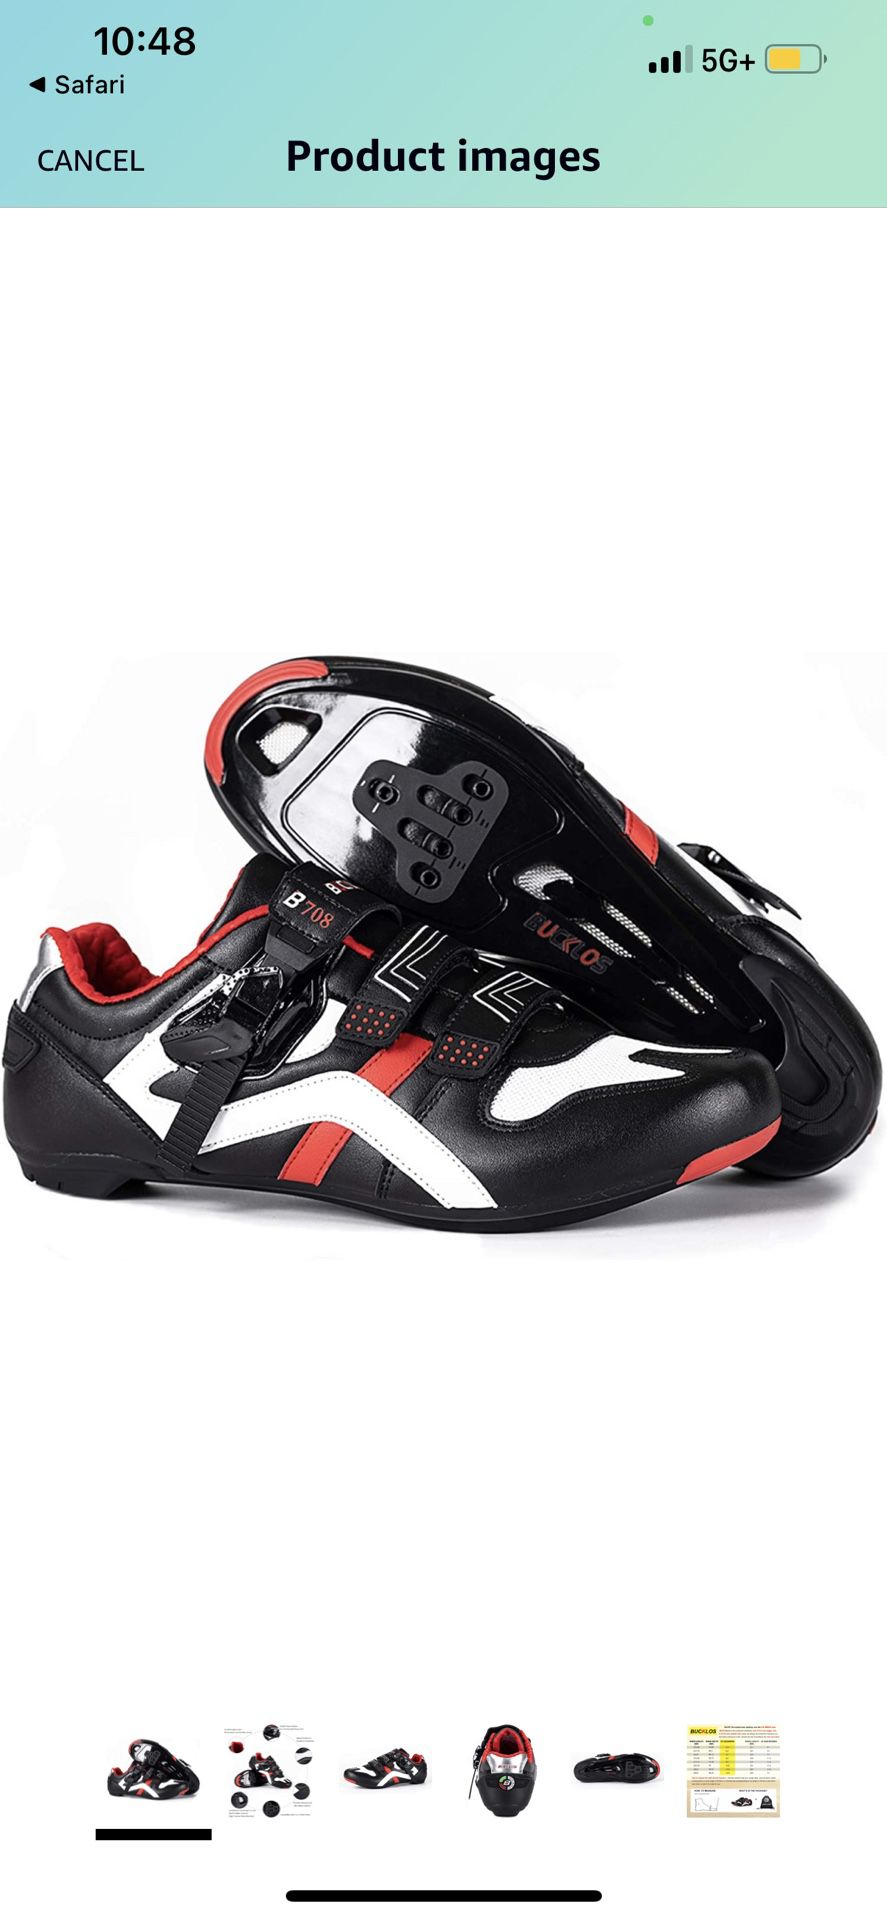 BUCKLOS Cycling Shoes Mens Compatible with Peloton Indoor Outdoor Biking Shoes Precise Buckle Strap fit Spinning Shoes Bicycle Sneakers for SPD 